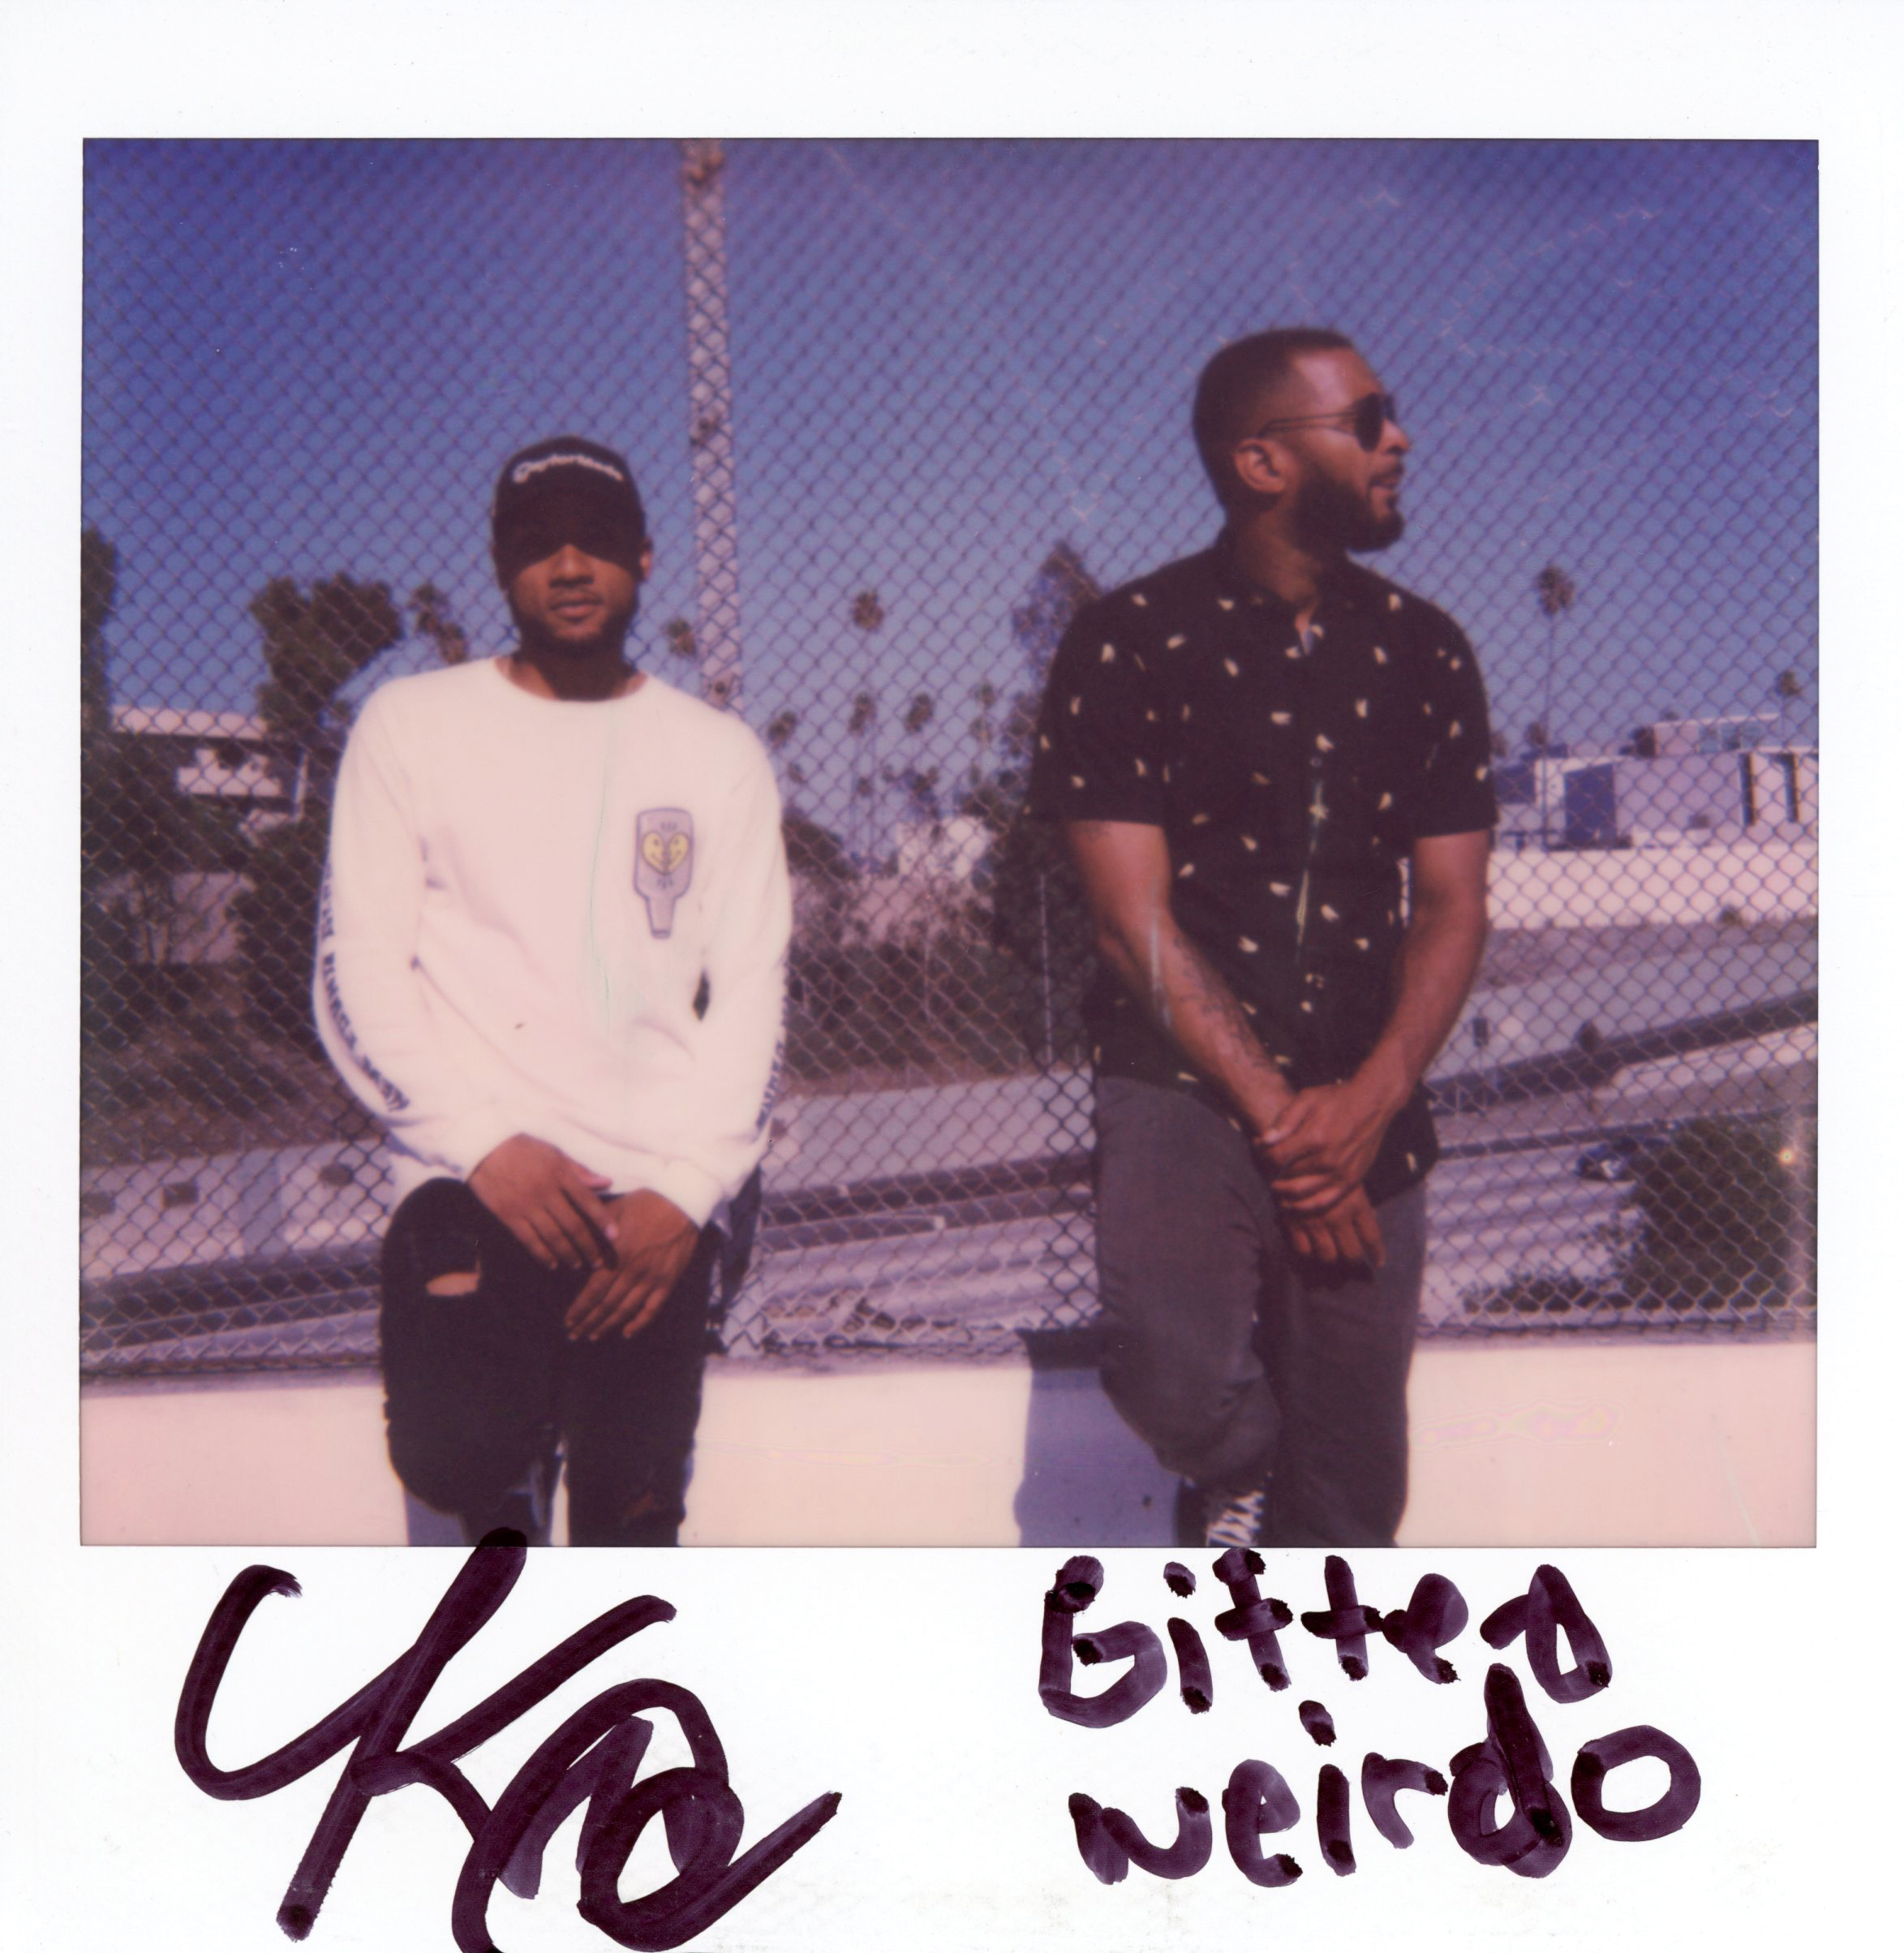 Kanin and Gifted Weirdo - Hollywood, Los Angeles - 2018